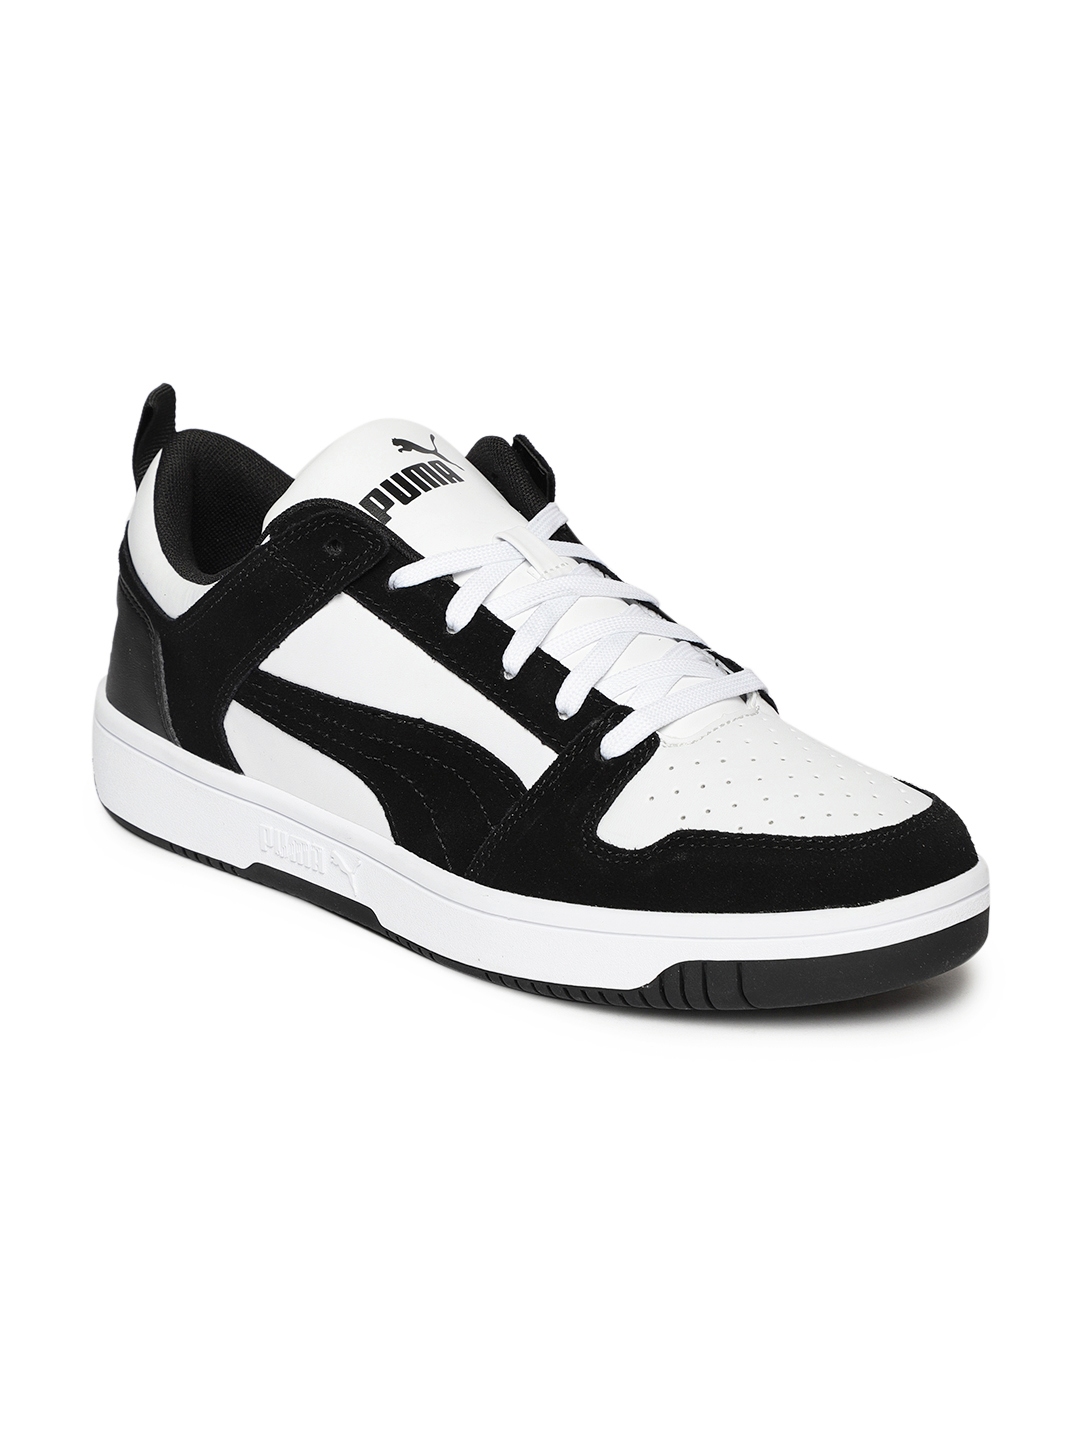 Puma Unisex Black & White Rebound LayUp Sneakers - Casual Shoes for Unisex 10136989 | Myntra